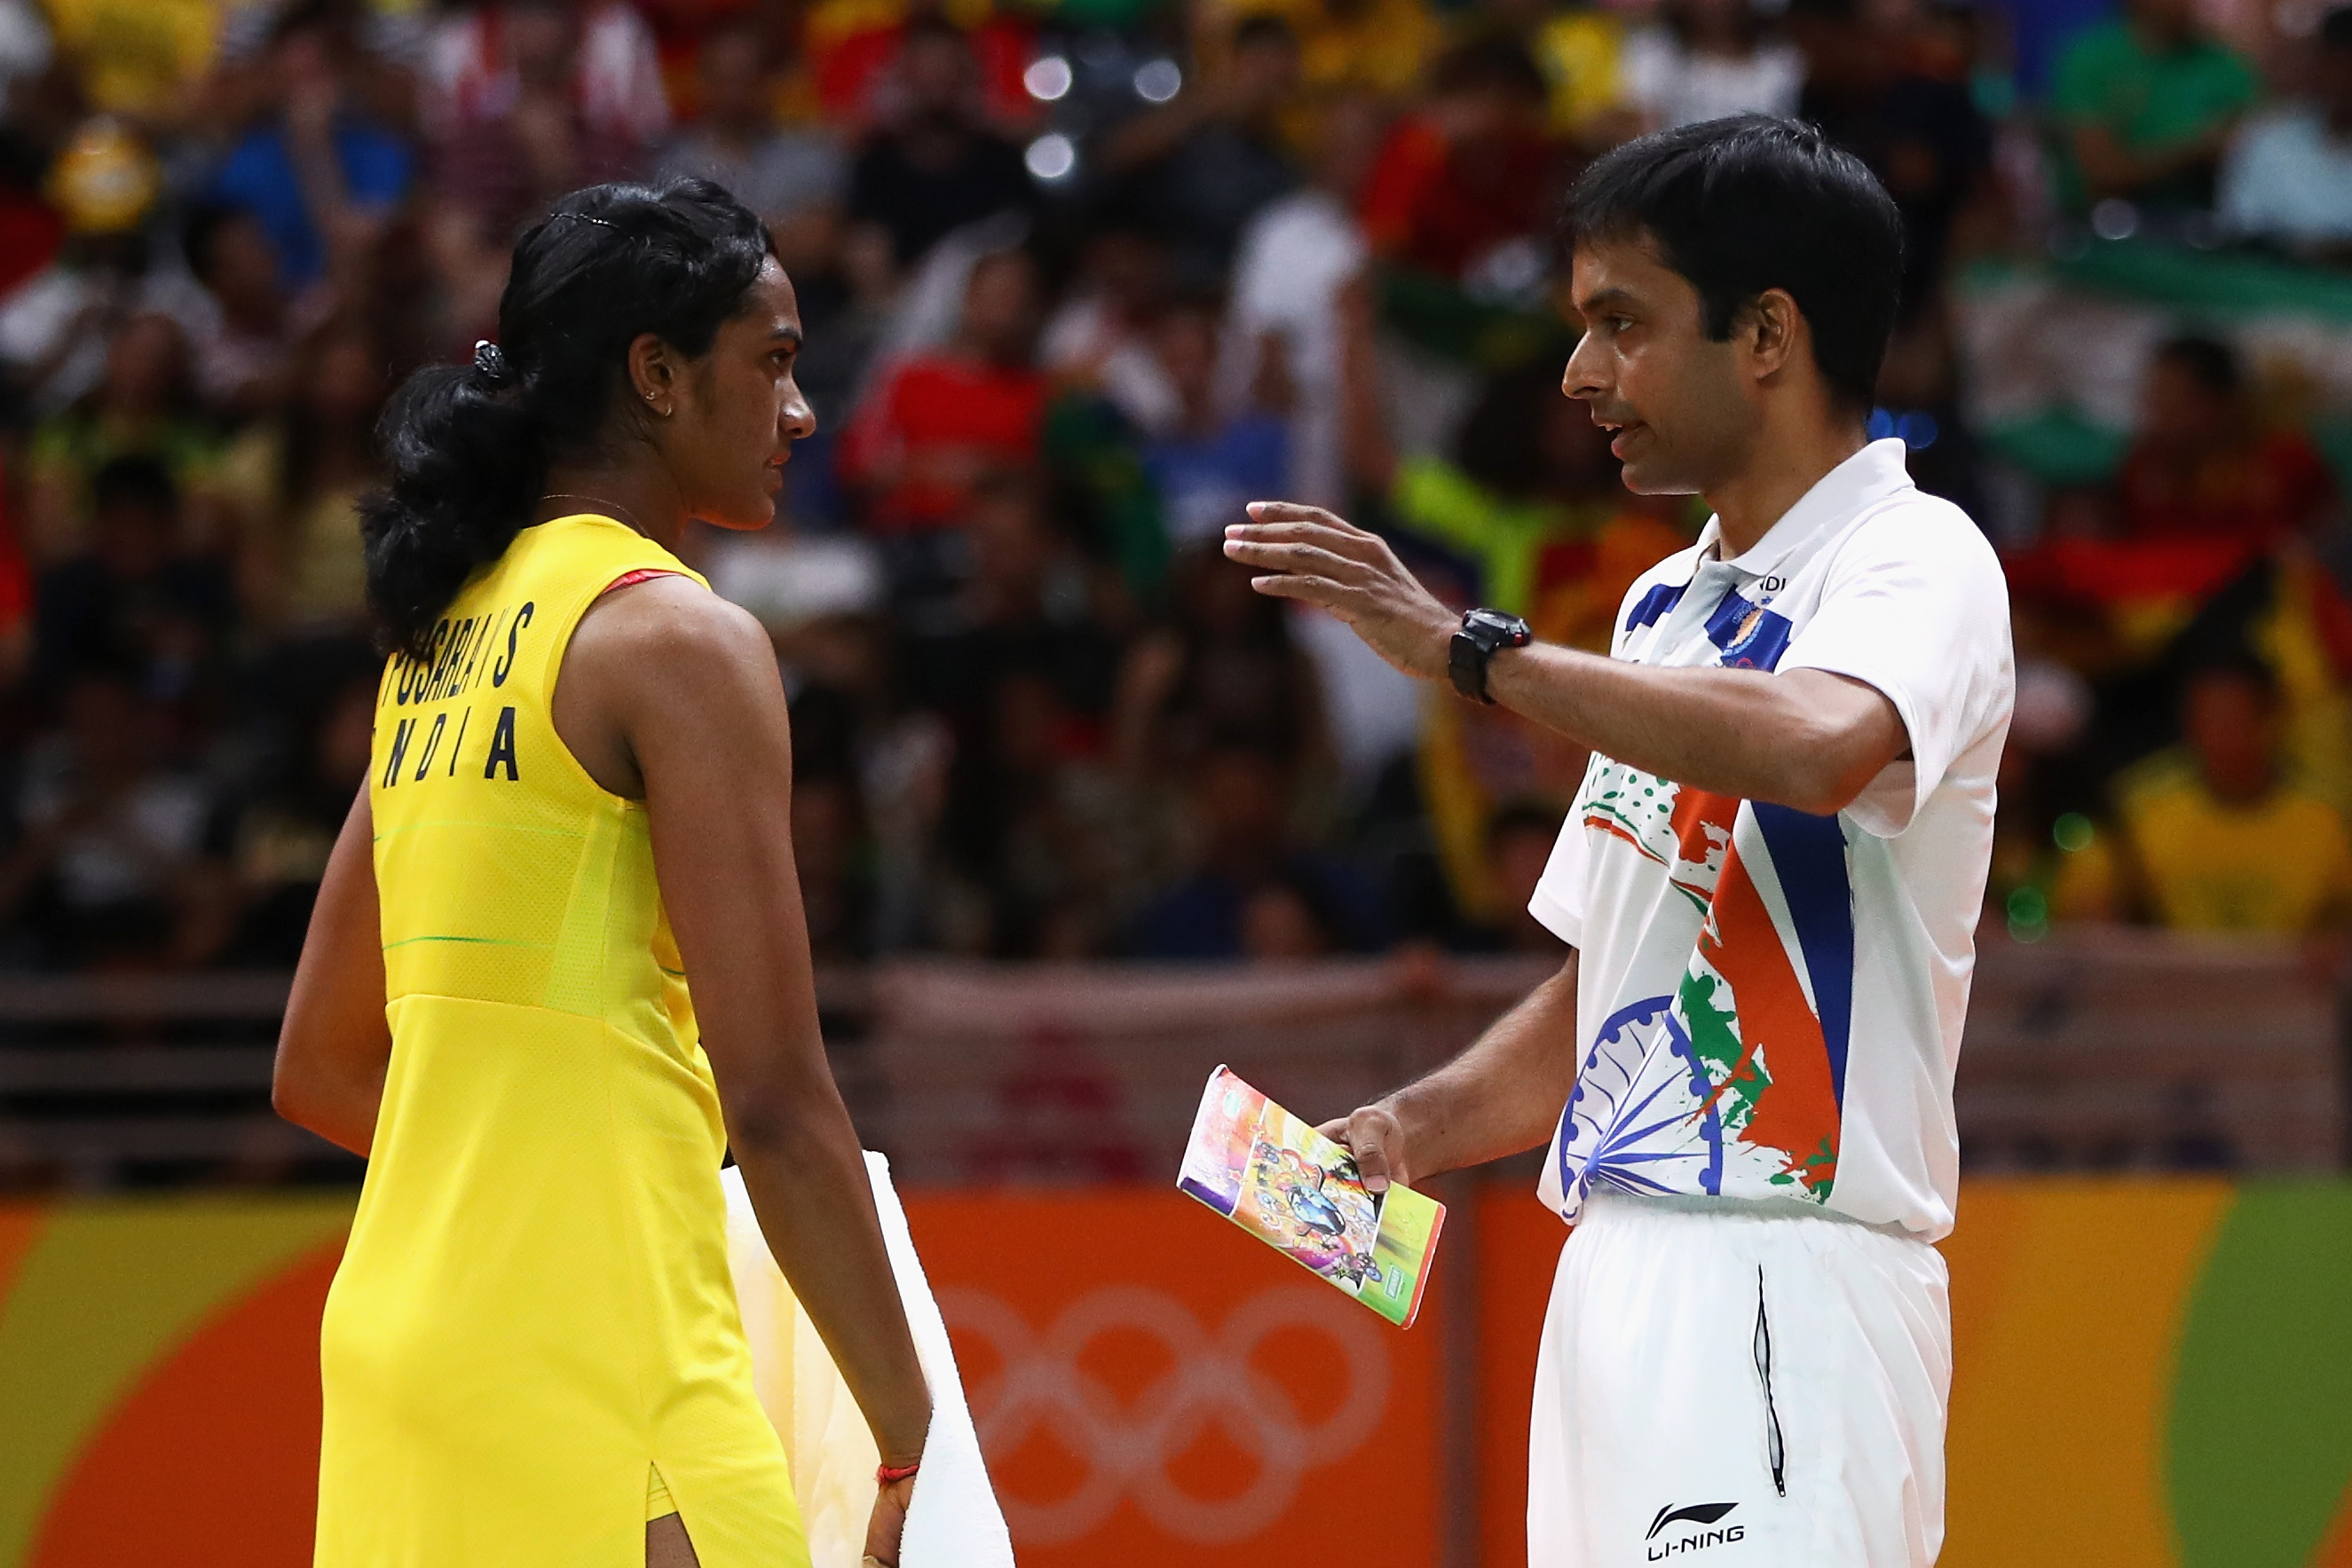 Sudirman Cup 2019 | The draw is very tough, believes Pullela Gopichand